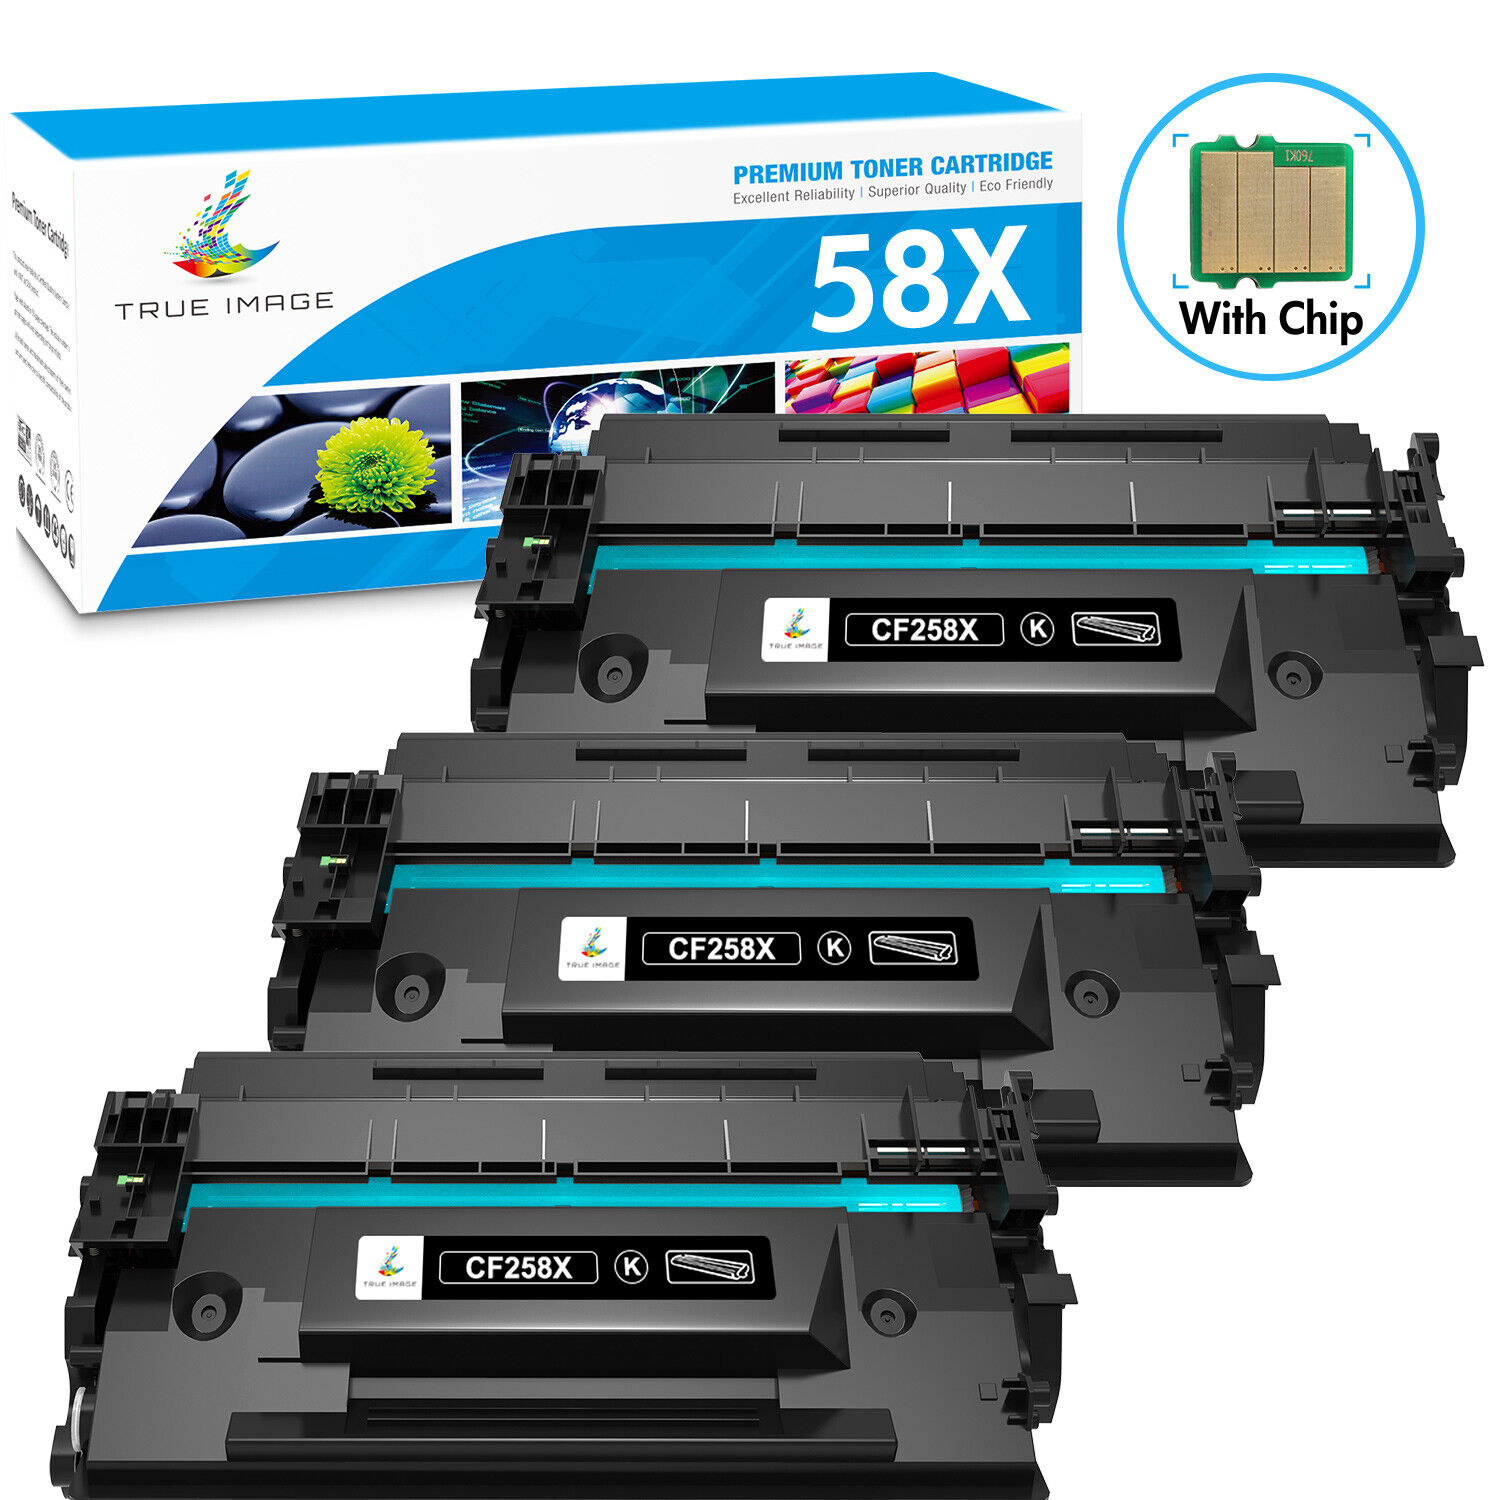 CF258A CF258X 58X WITH CHIP for HP 58A Toner LaserJet Pro M404dn MFP M428fdw lot